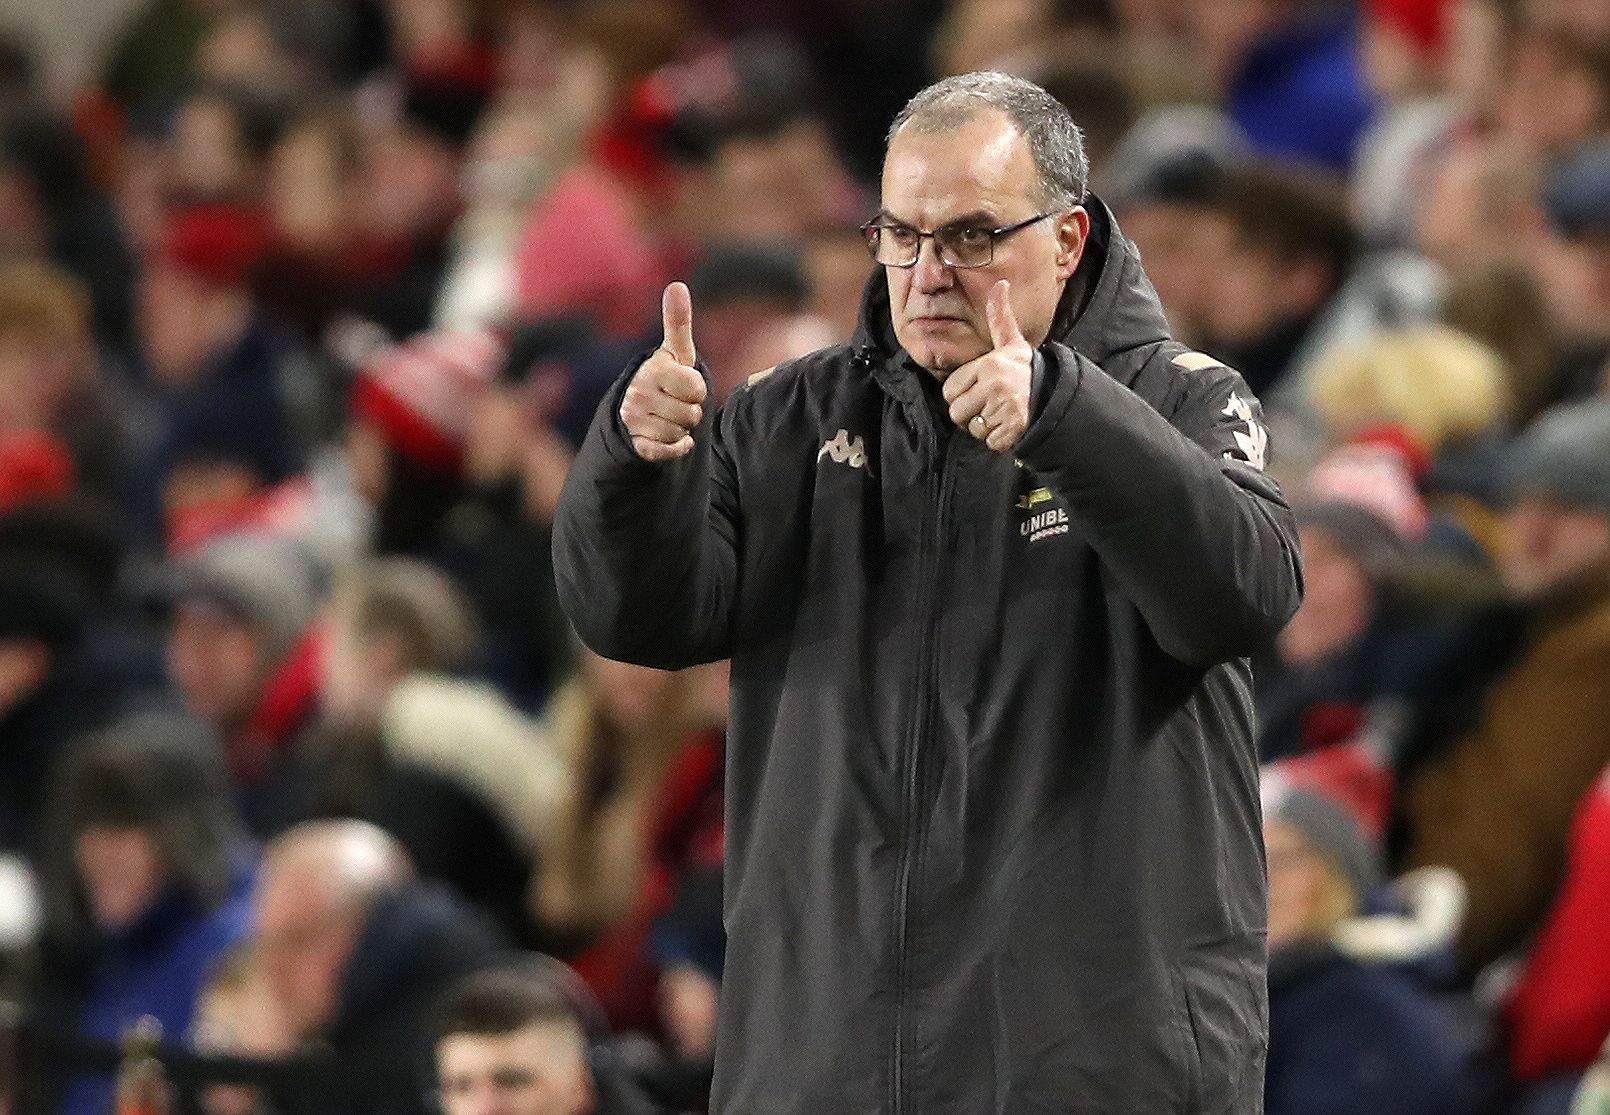 Soccer Football - Championship - Middlesbrough v Leeds United - Riverside Stadium, Middlesbrough, Britain - February 26, 2020   Leeds United manager Marcelo Bielsa    Action Images/Molly Darlington    EDITORIAL USE ONLY. No use with unauthorized audio, video, data, fixture lists, club/league logos or 